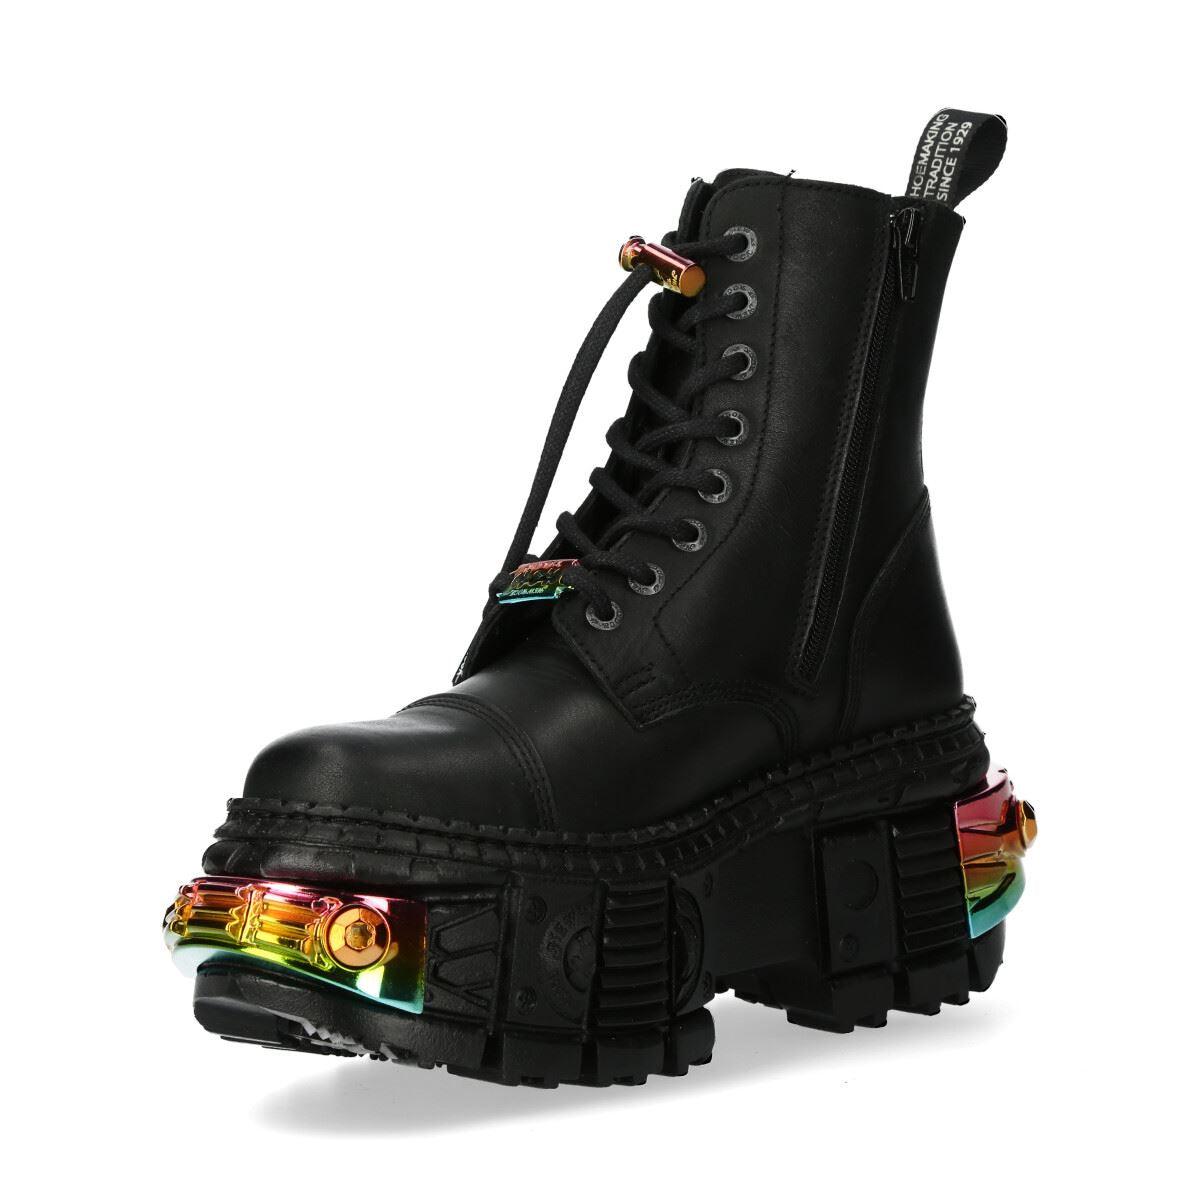 New Rock Boots WALL83CCT-S8 Unisex Metallic Black Leather Platform Gothic Boots - Knighthood Store